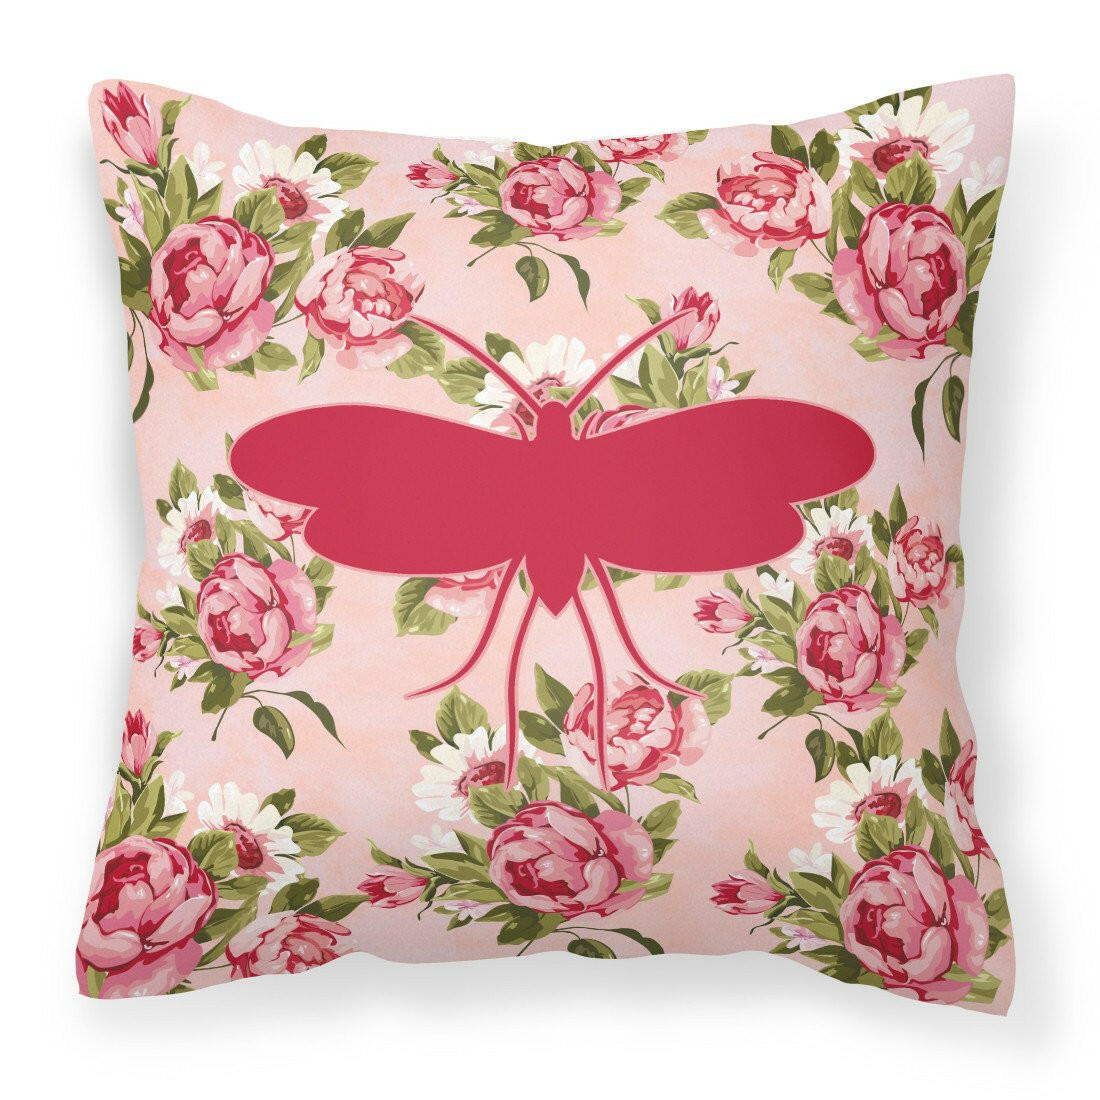 Moth Shabby Chic Pink Roses  Fabric Decorative Pillow BB1058-RS-PK-PW1414 - the-store.com